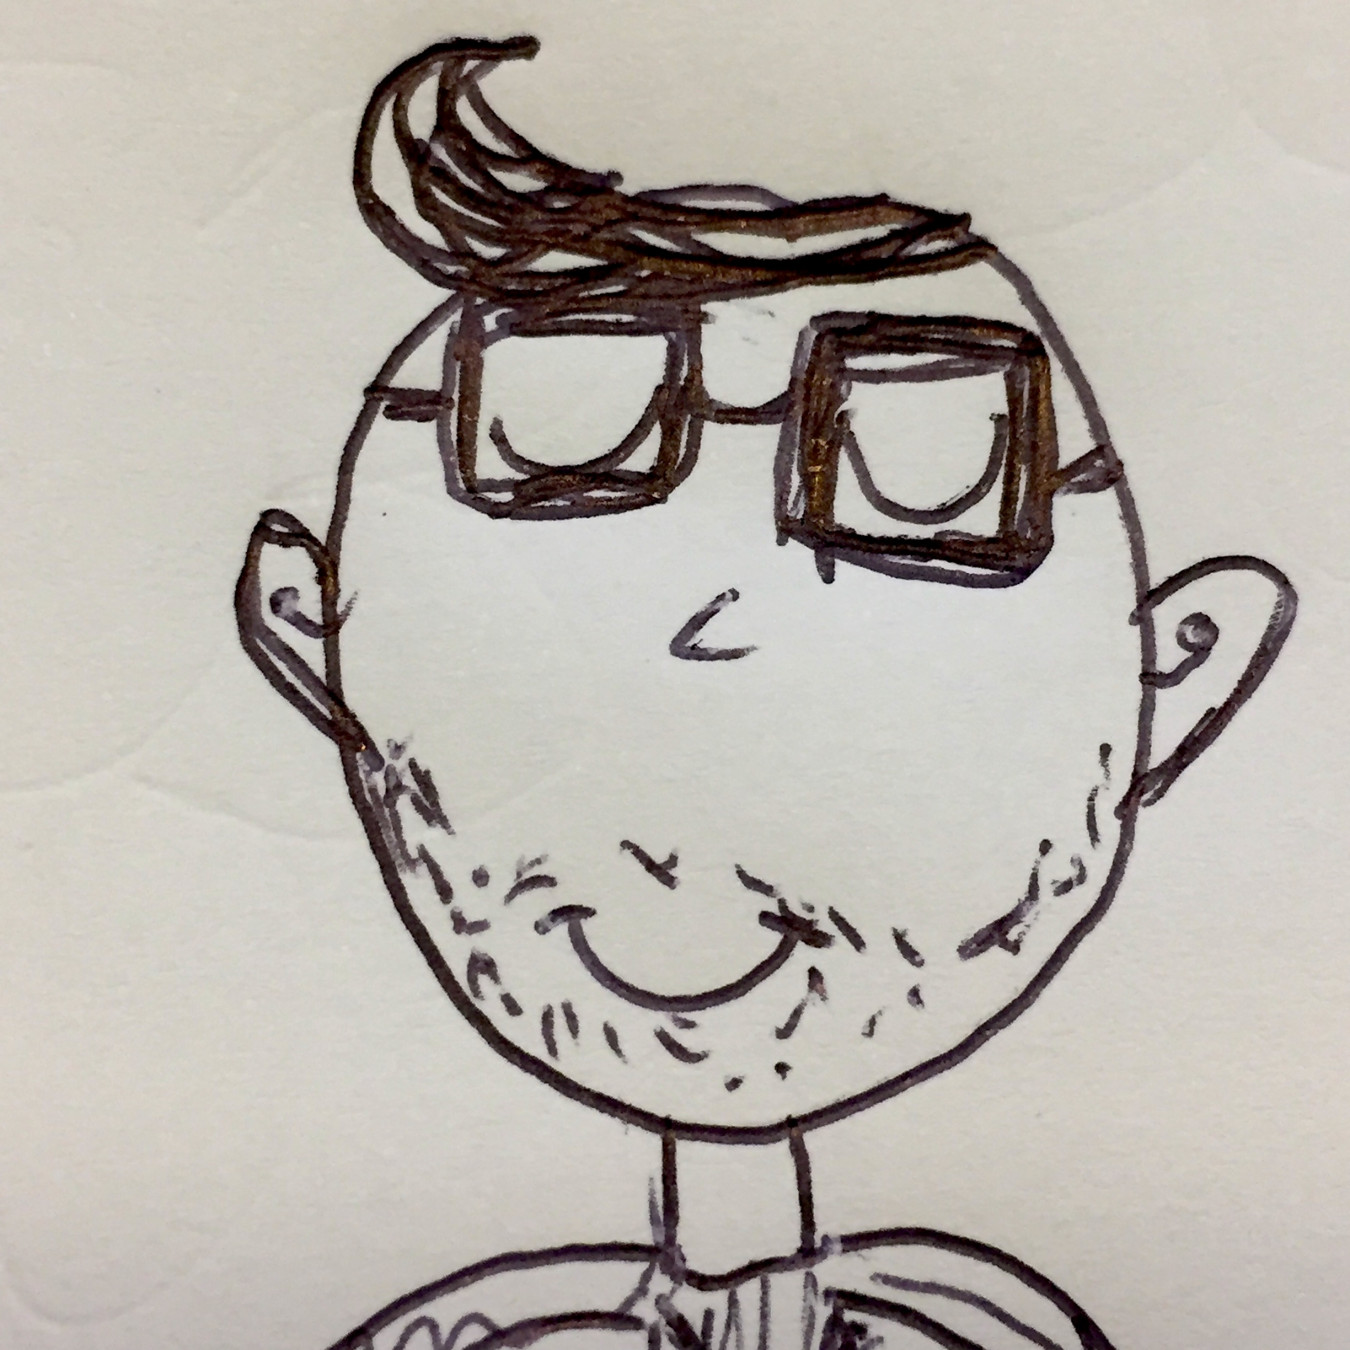 An illustration drawing of David Clarke with big glasses used black ink.